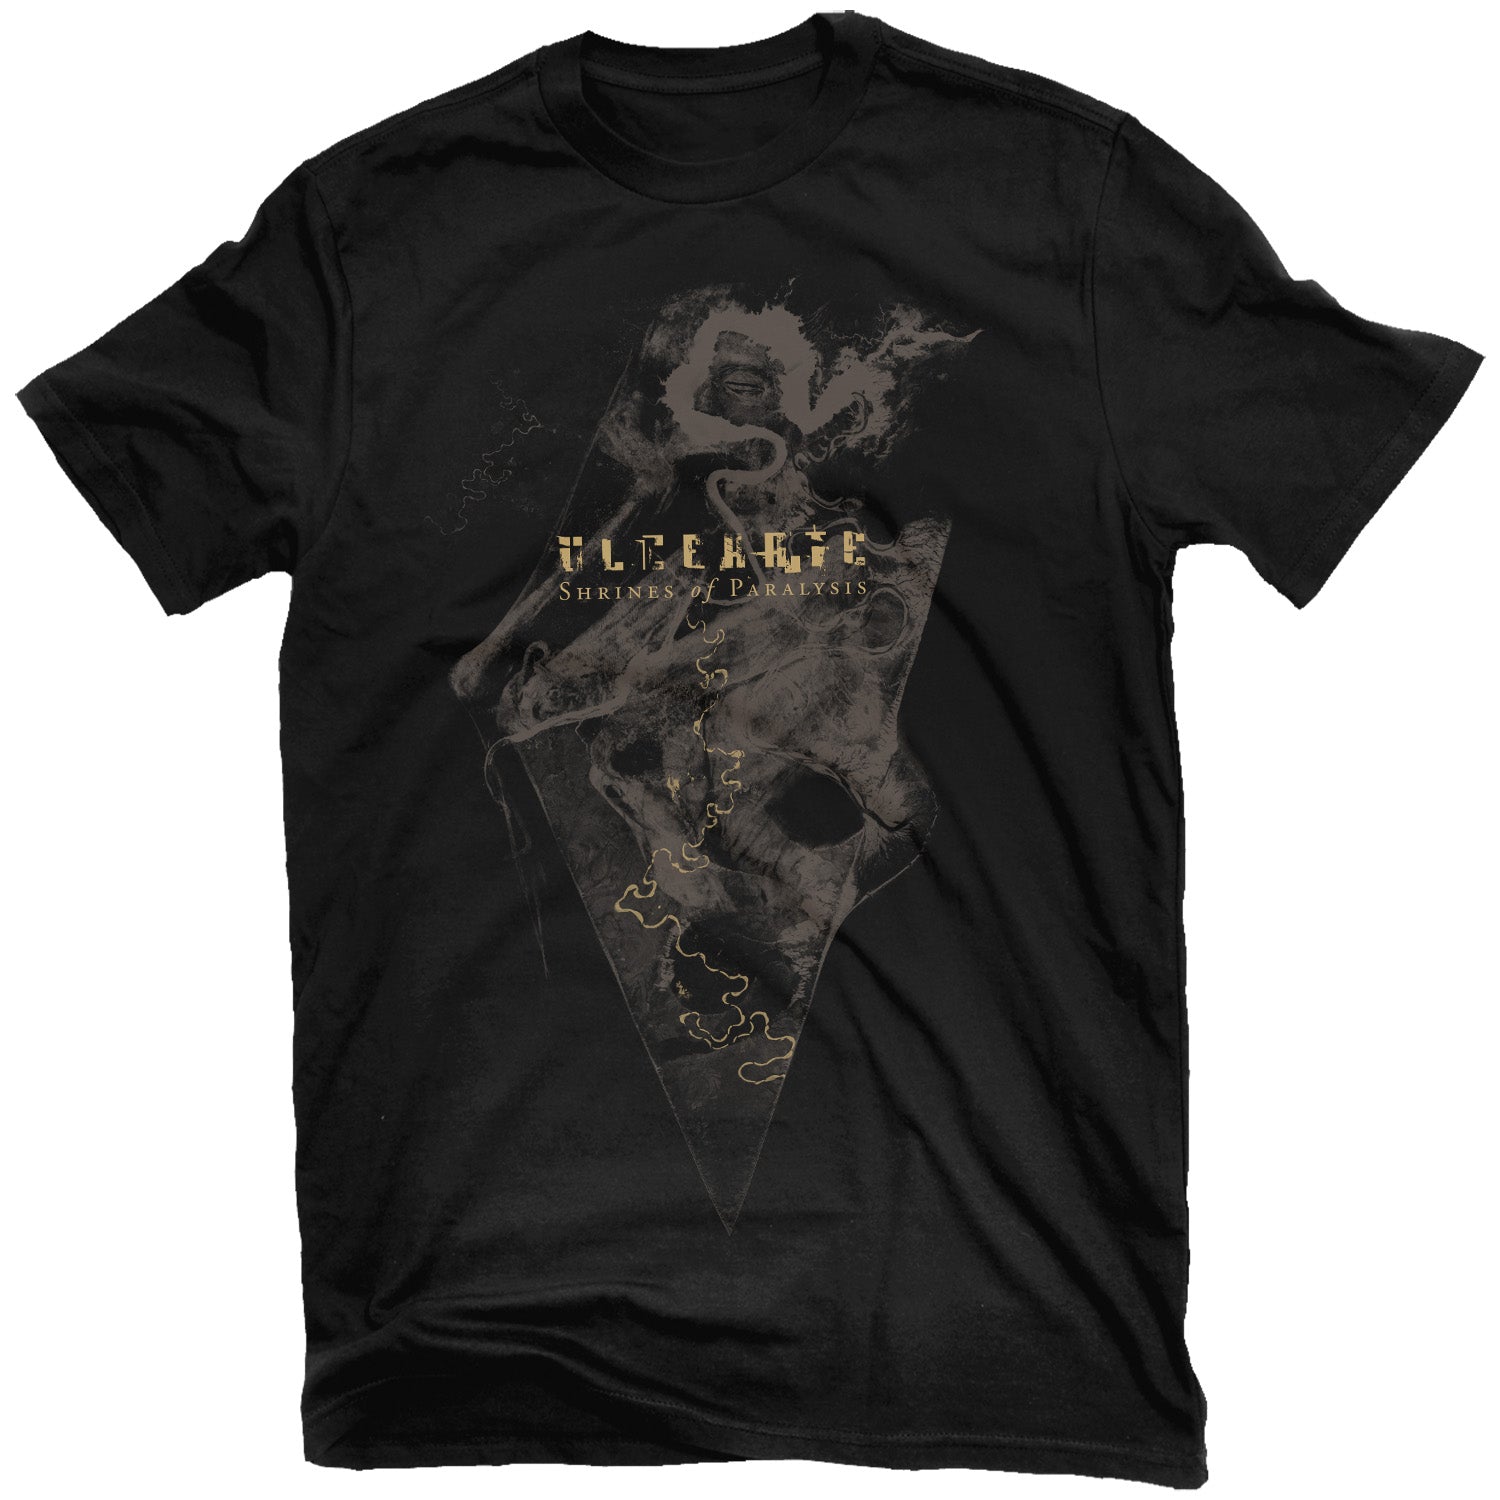 Ulcerate "Shrines of Paralysis" T-Shirt